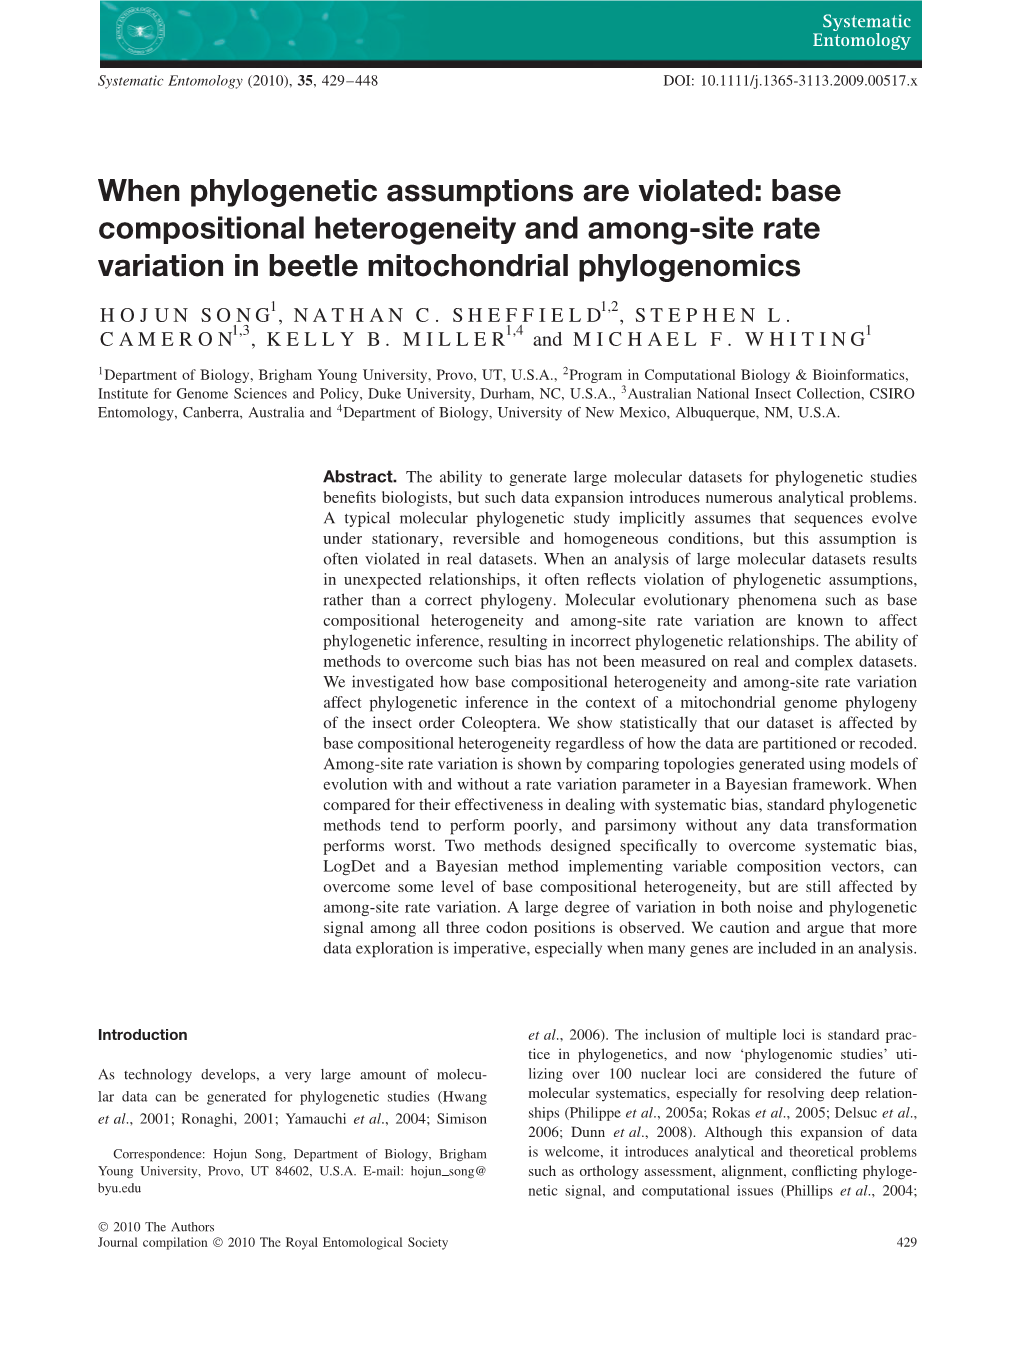 When Phylogenetic Assumptions Are Violated: Base Compositional Heterogeneity and Among-Site Rate Variation in Beetle Mitochondrial Phylogenomics